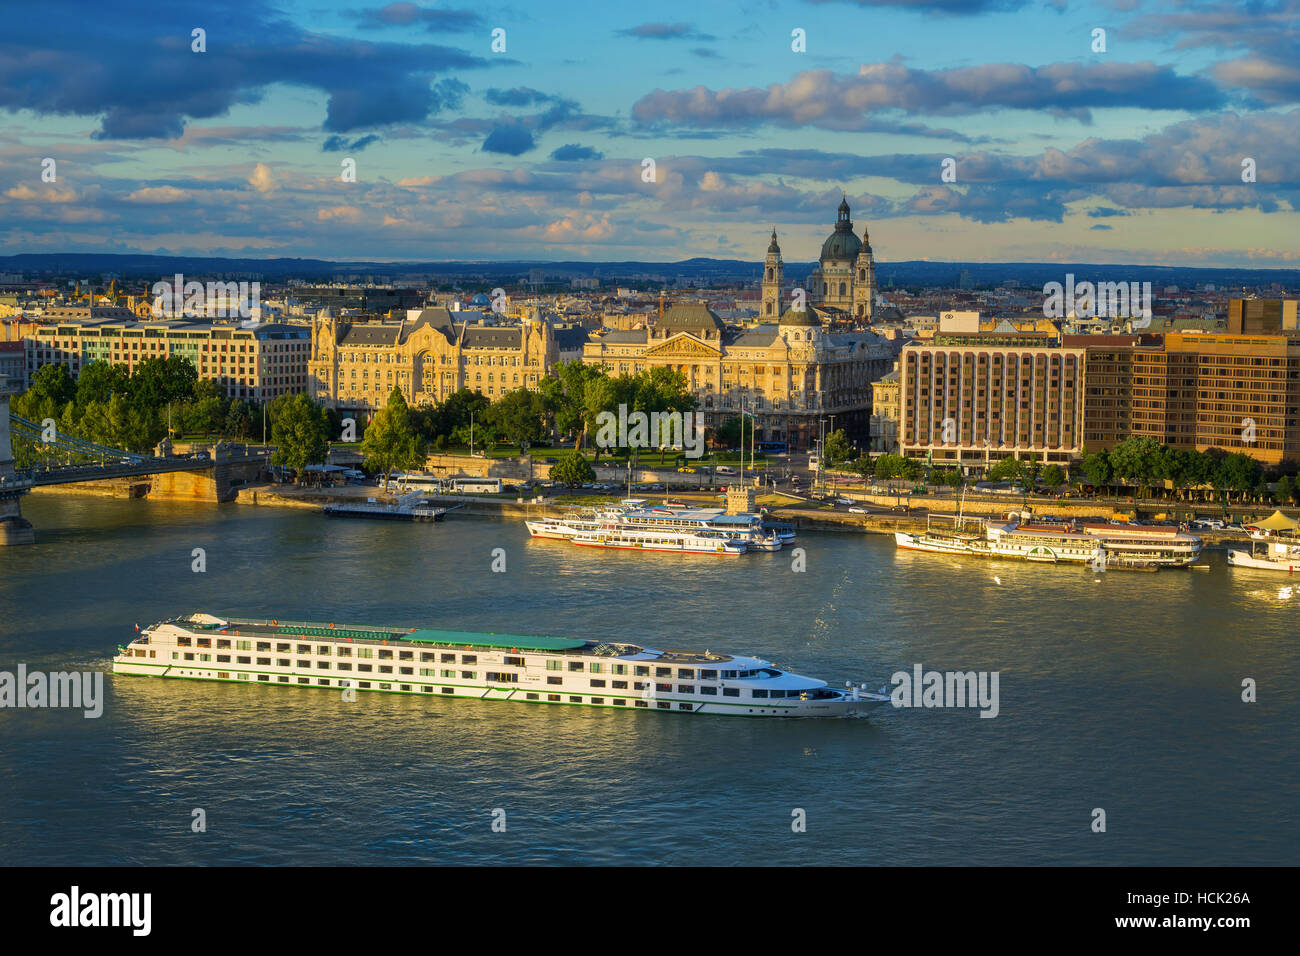 River Cruises are a popular way to explore the Danube in Budapest. Stock Photo